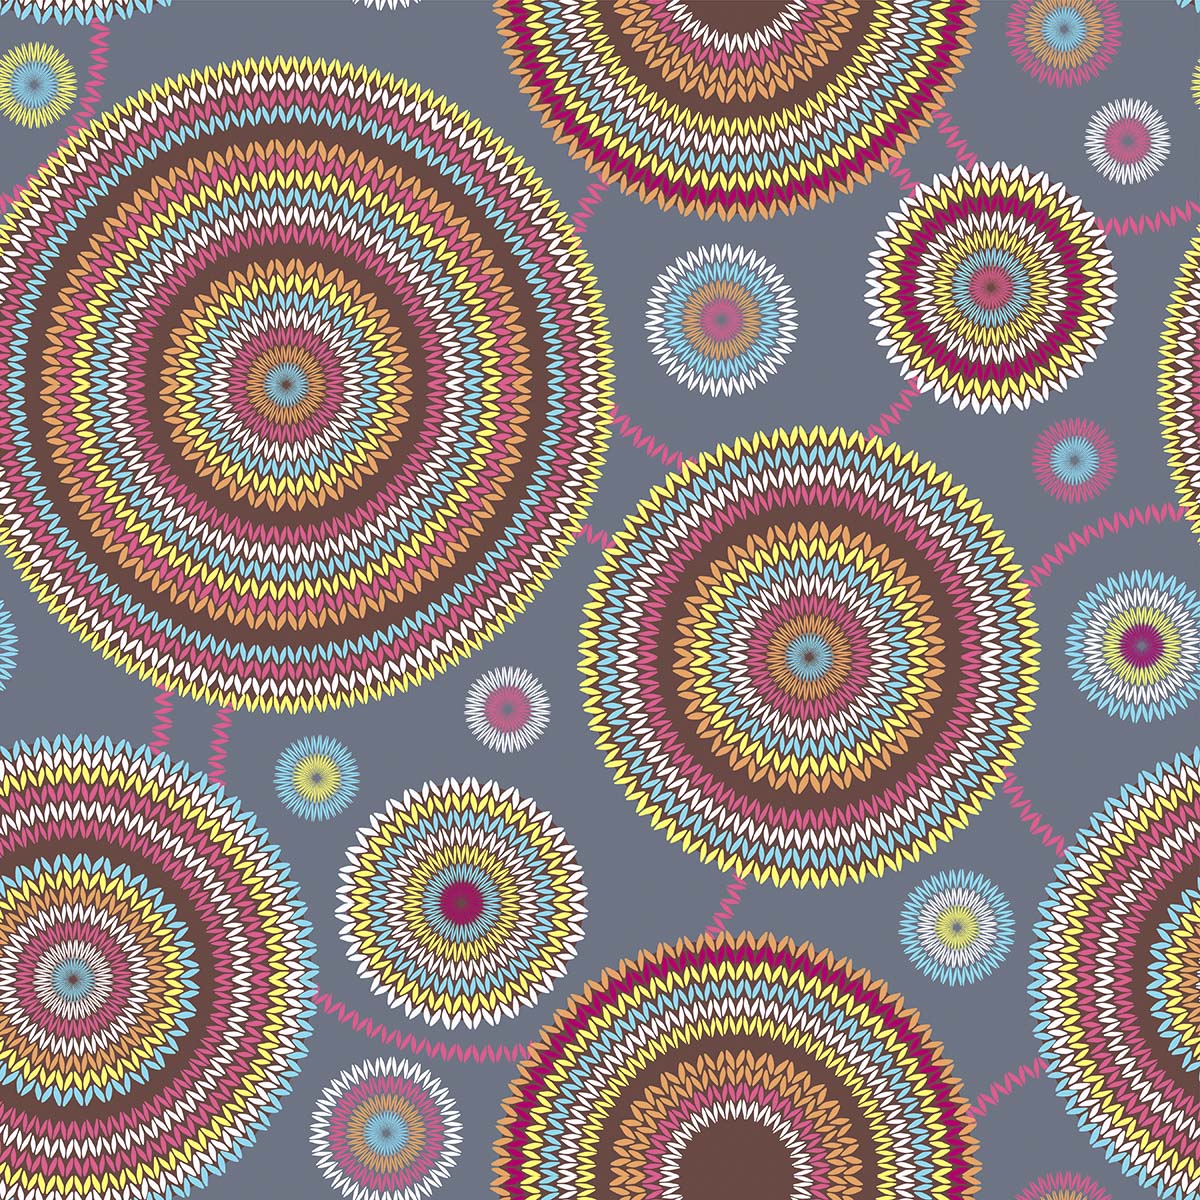 A pattern of colorful circles